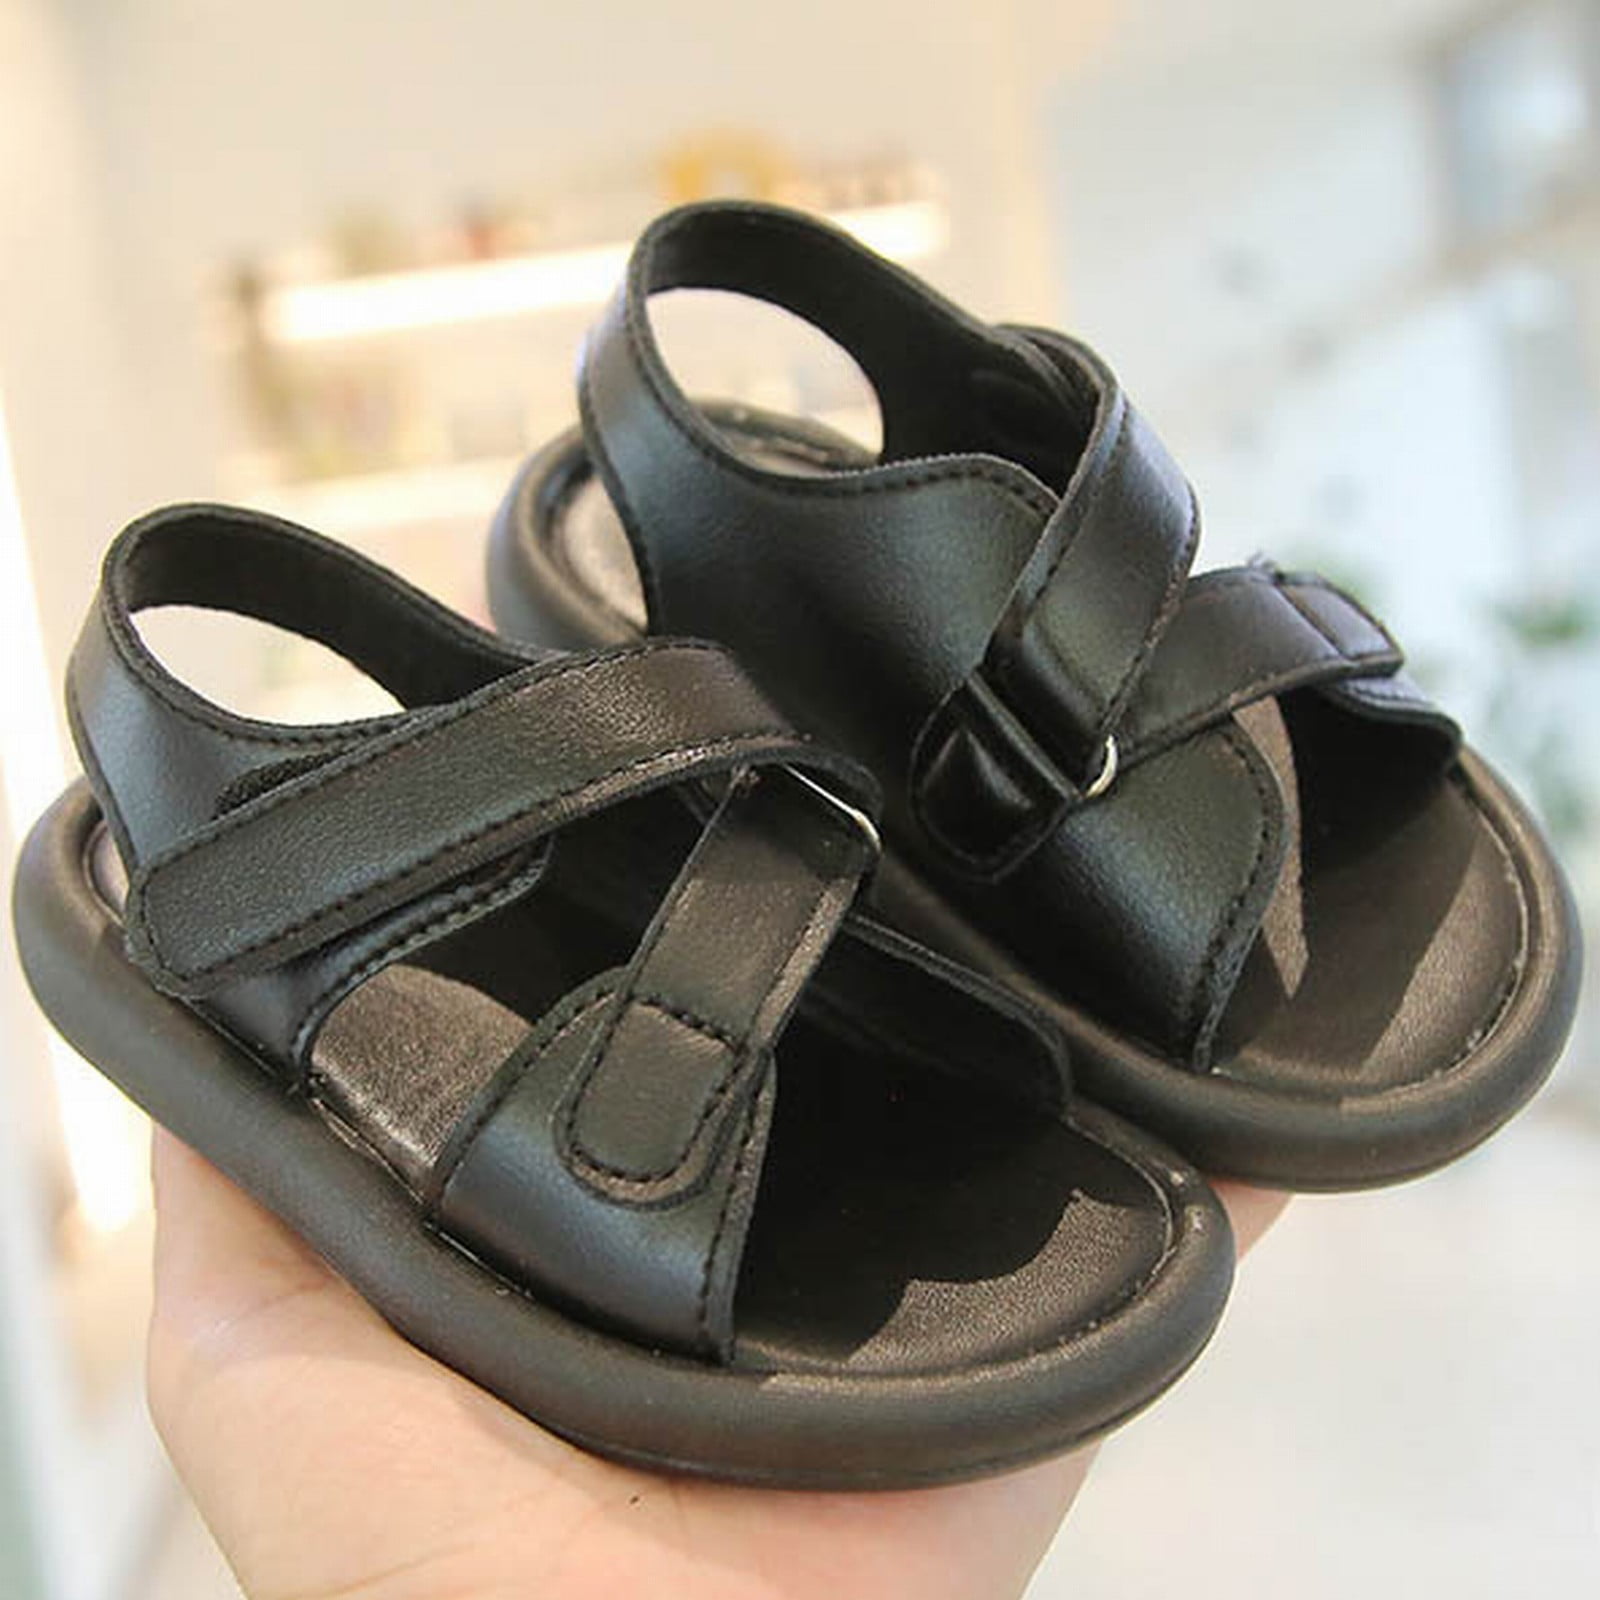 boys sandals size 33 | 1 Baby & Kids Ad For Sale in Ireland | DoneDeal